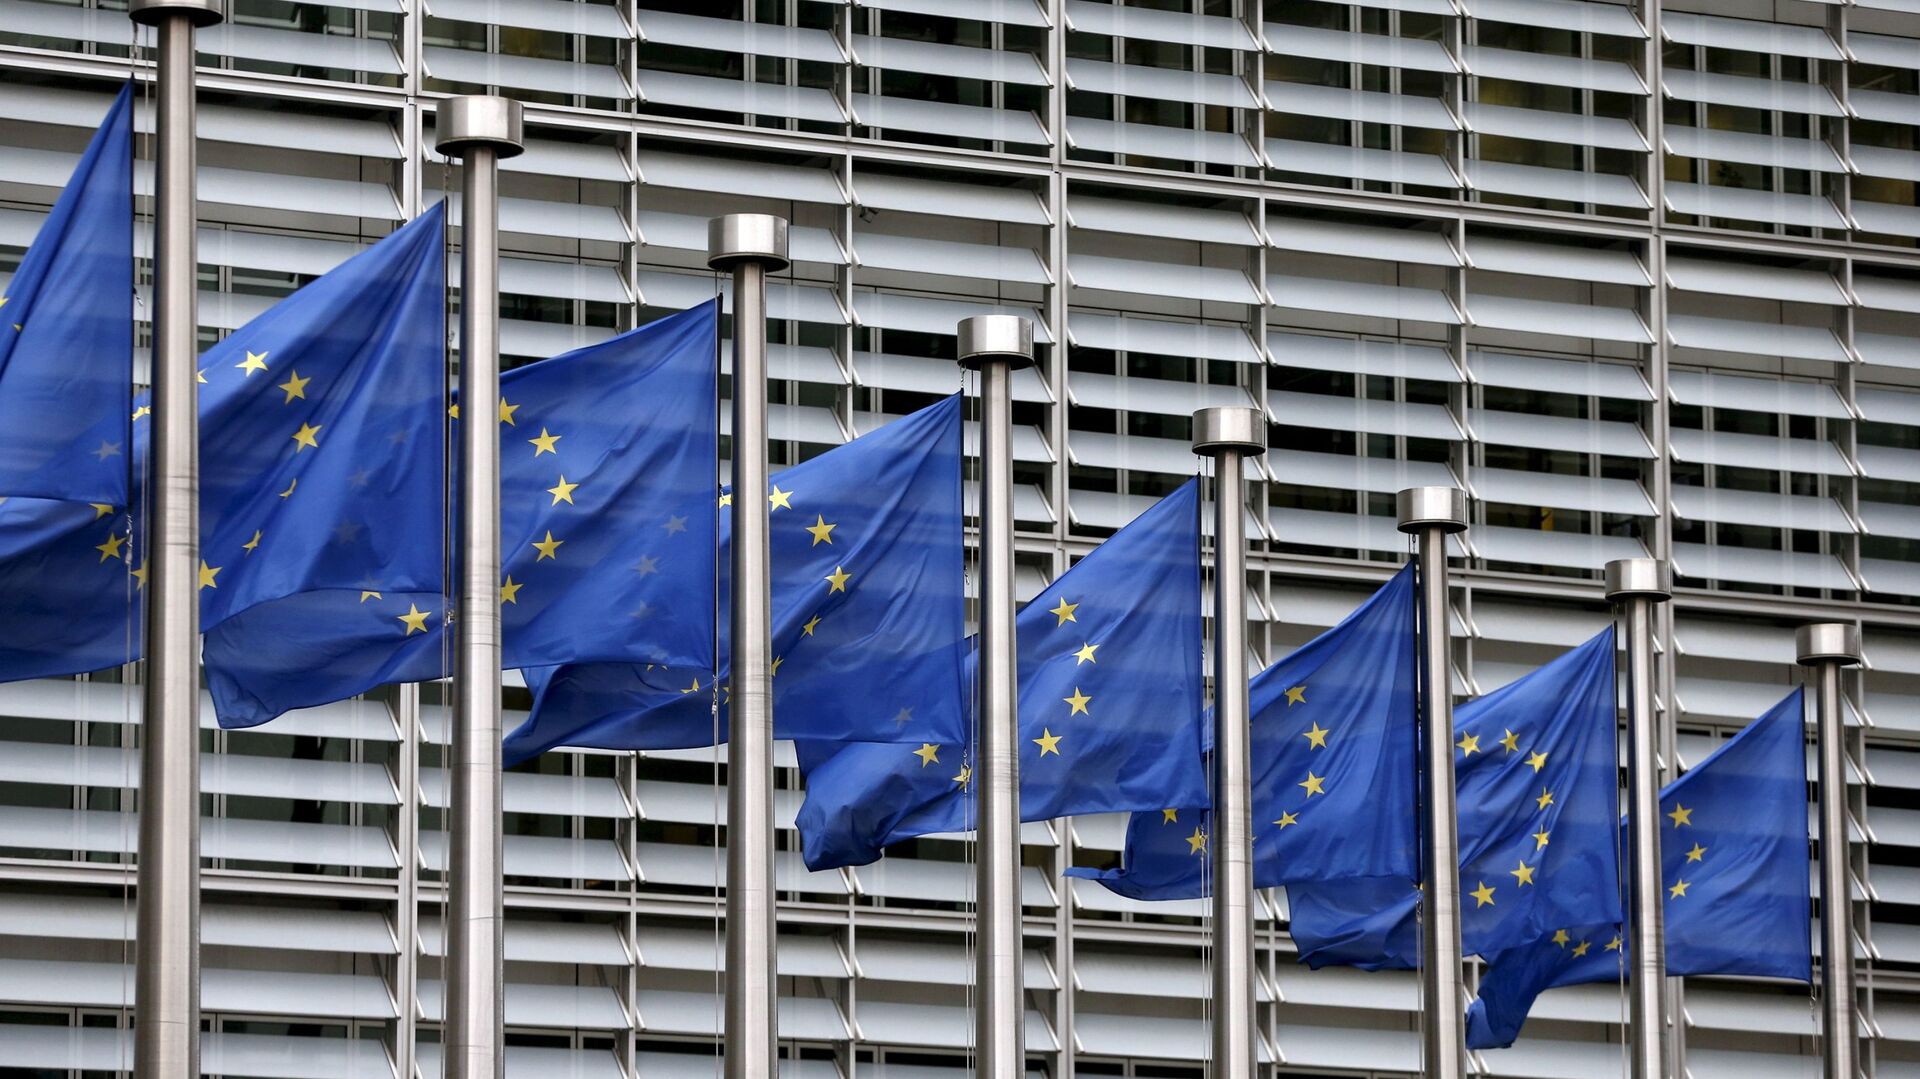 FILE PHOTO: Picture shows European Union flags fluttering outside the EU Commission headquarters in Brussels - Sputnik International, 1920, 06.10.2021